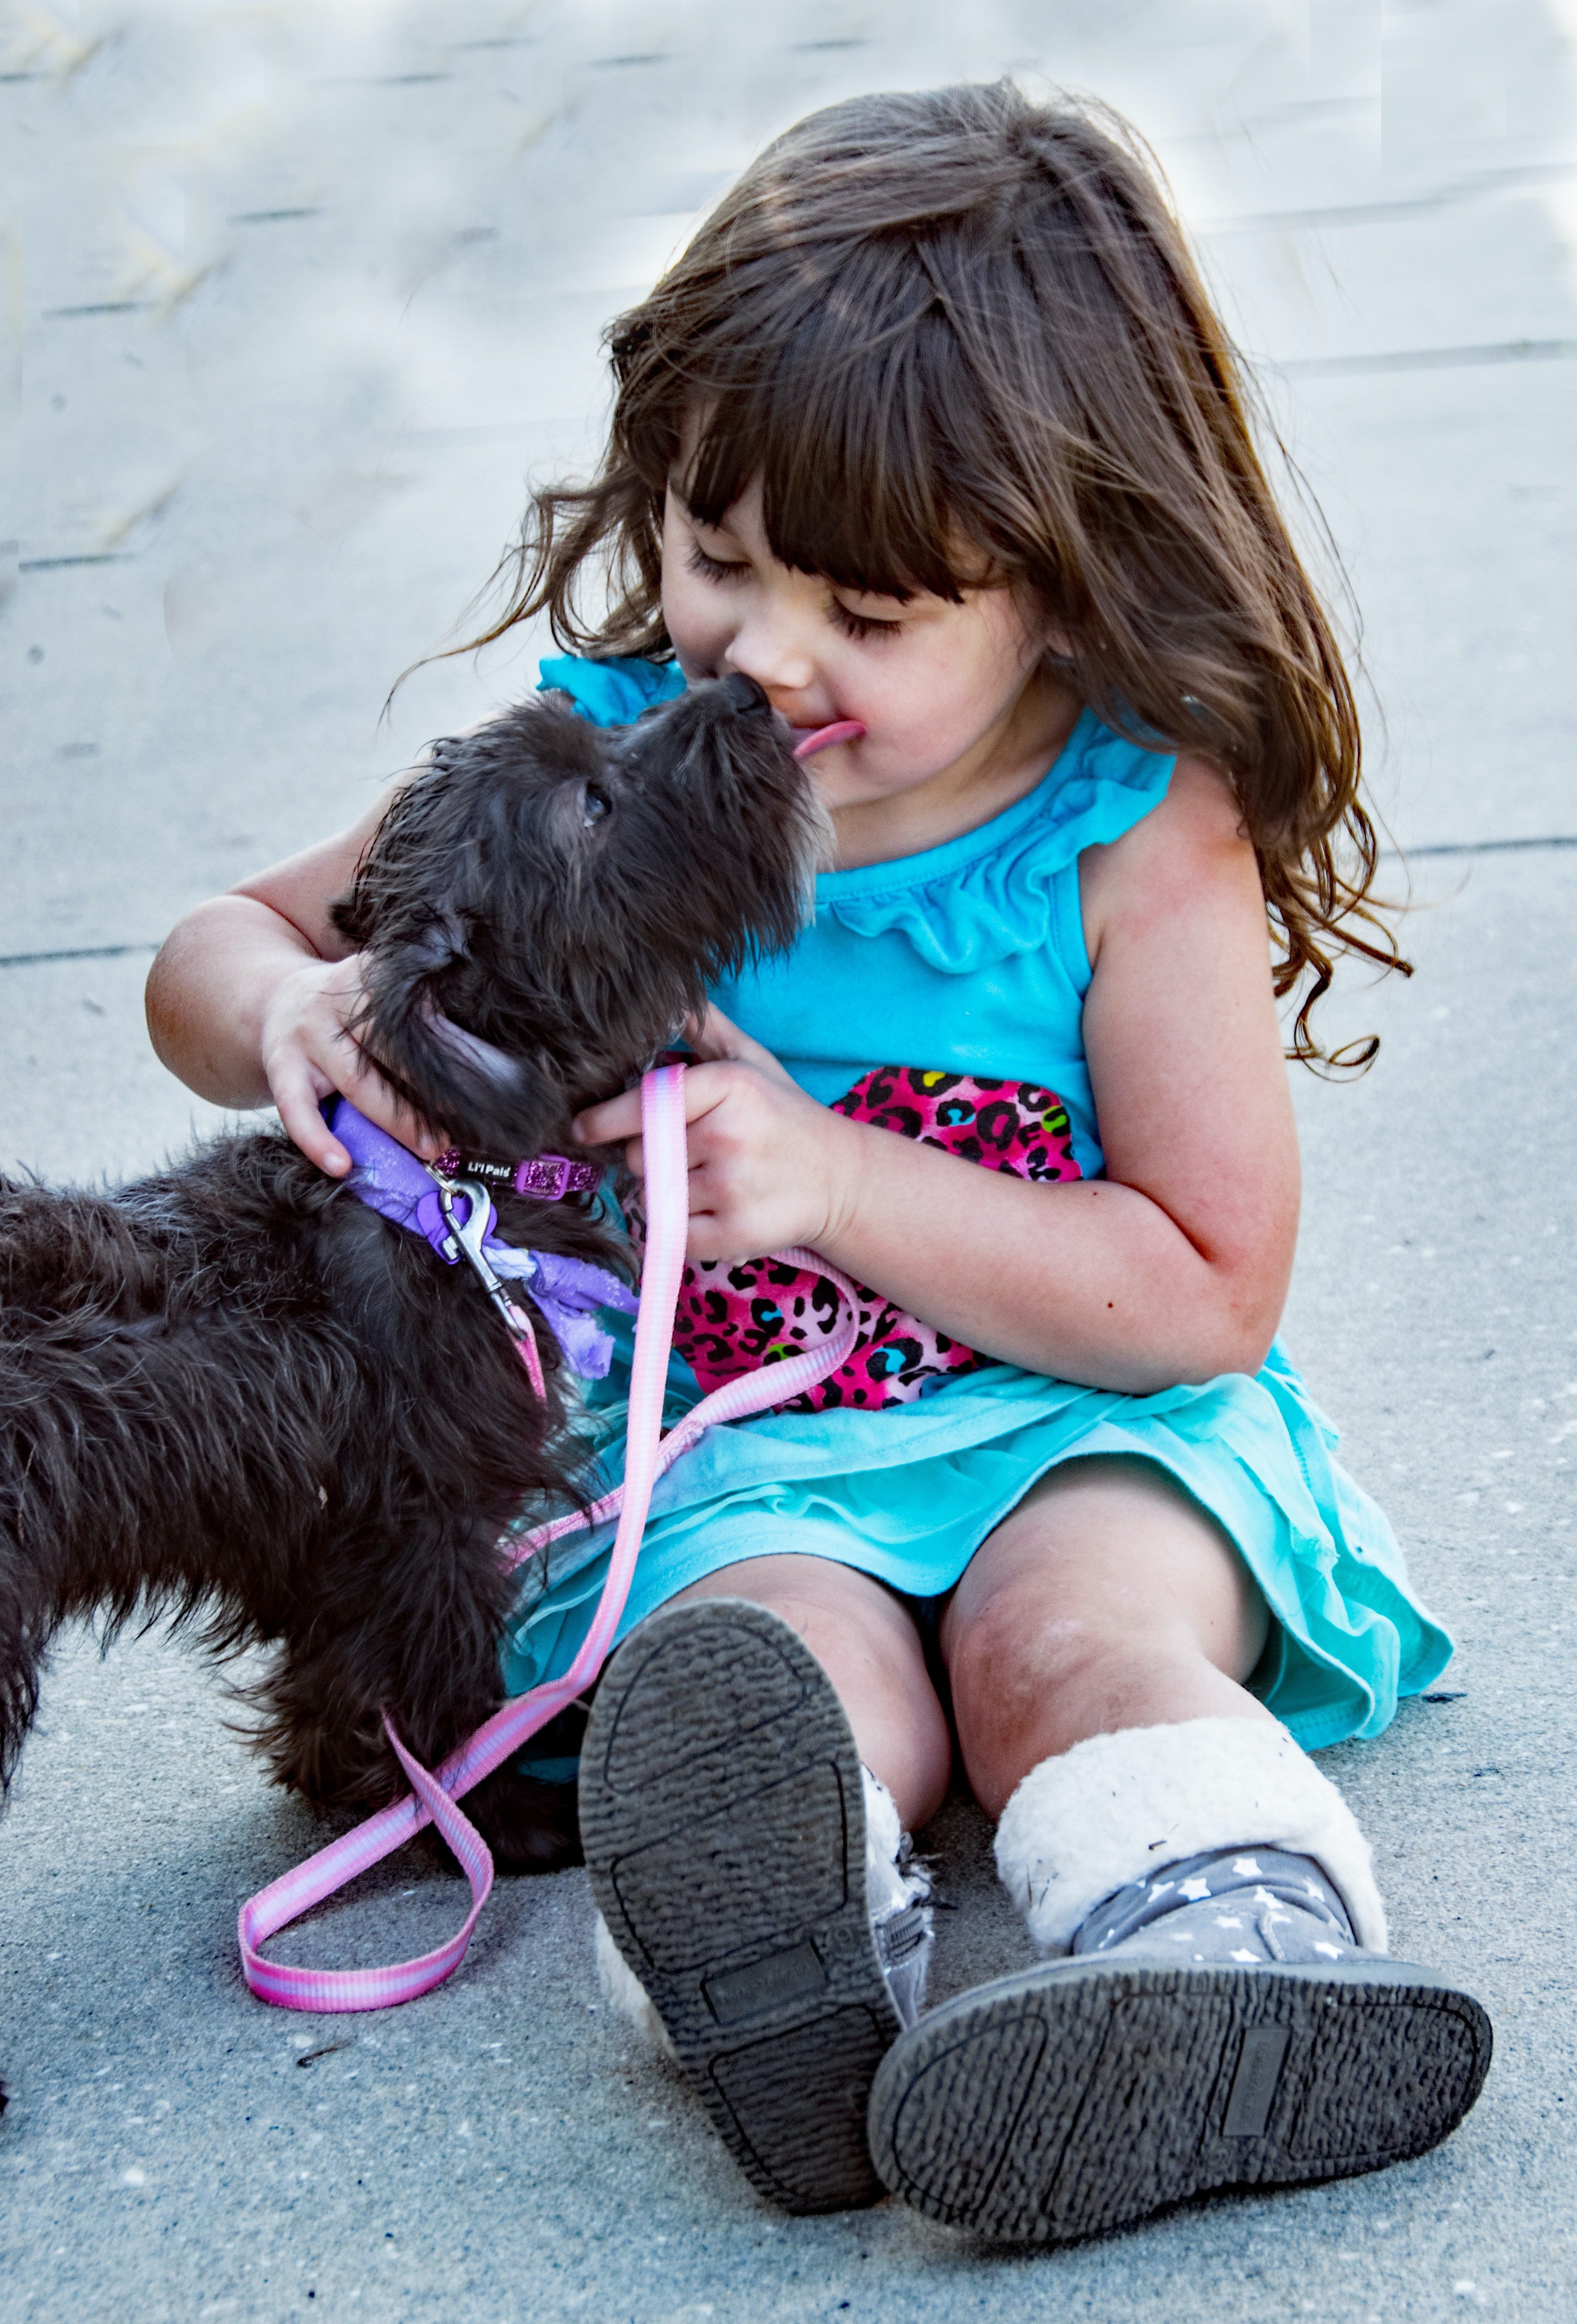 Jack raised Emily as his own daughter while taking care of his pet dog Ralph. | Source: Pexels